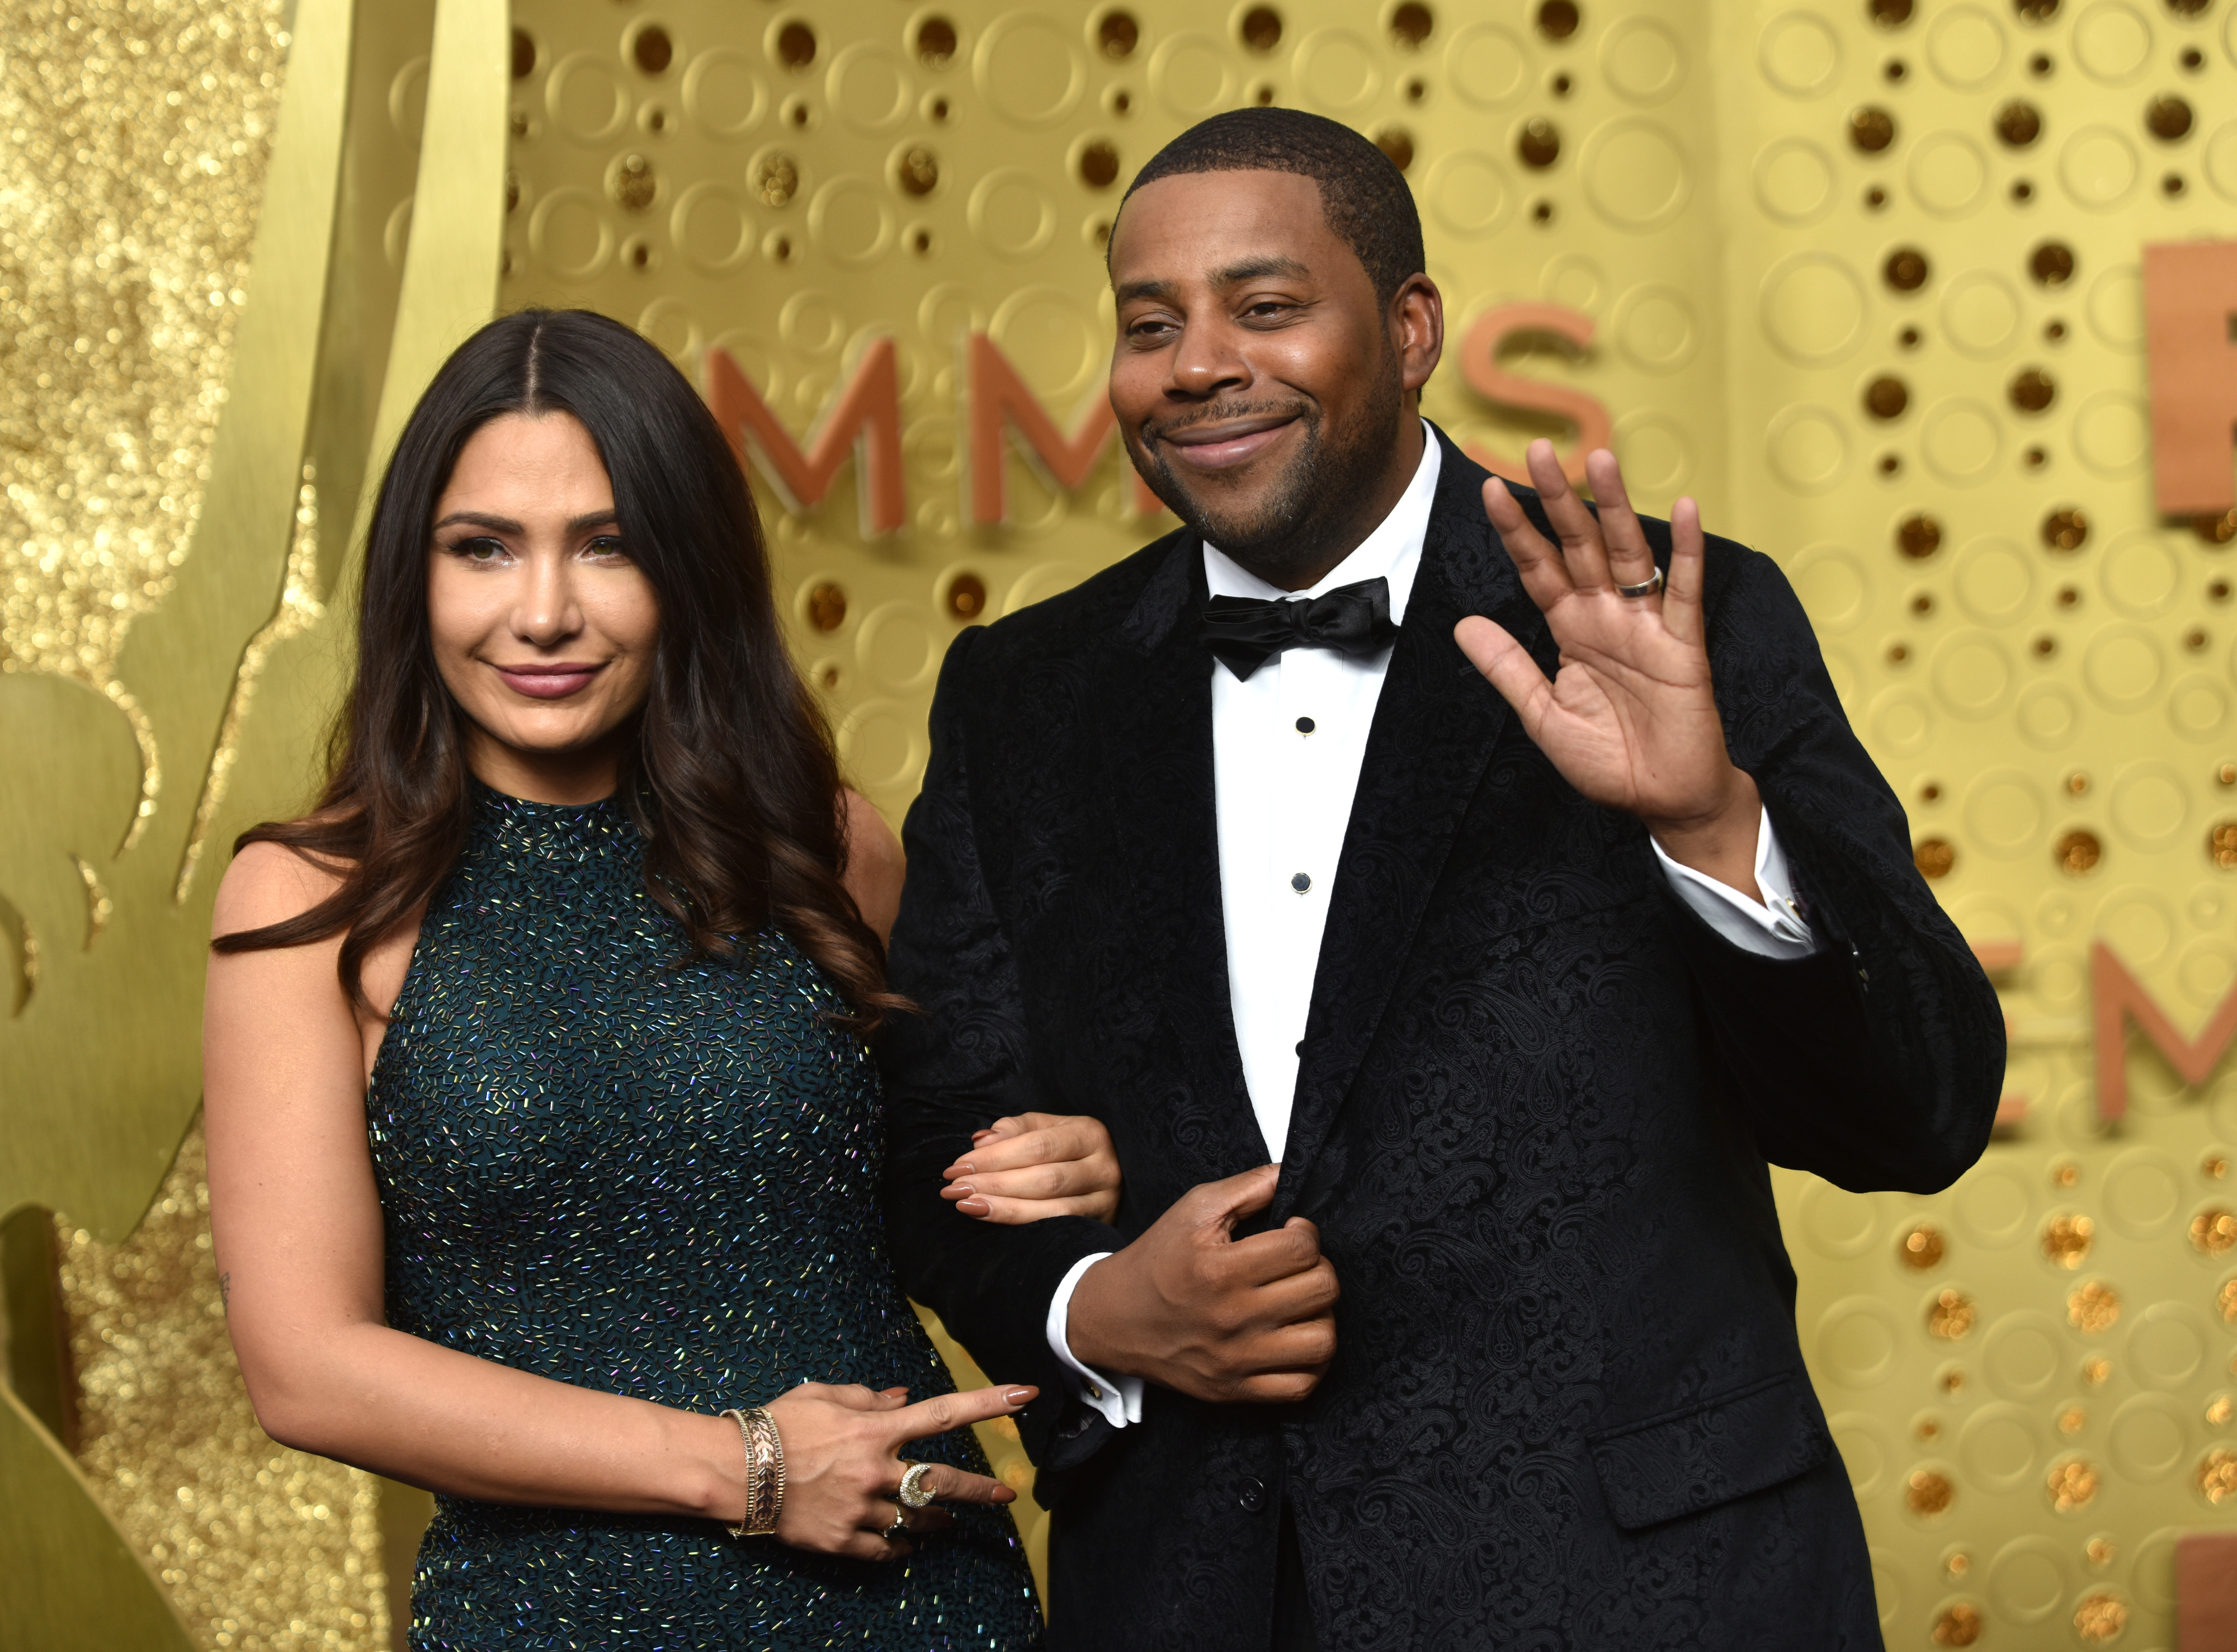 Saturday Night Live’s Kenan Thompson’s Wife Christina Evangeline Is a Model: Learn More About Her!